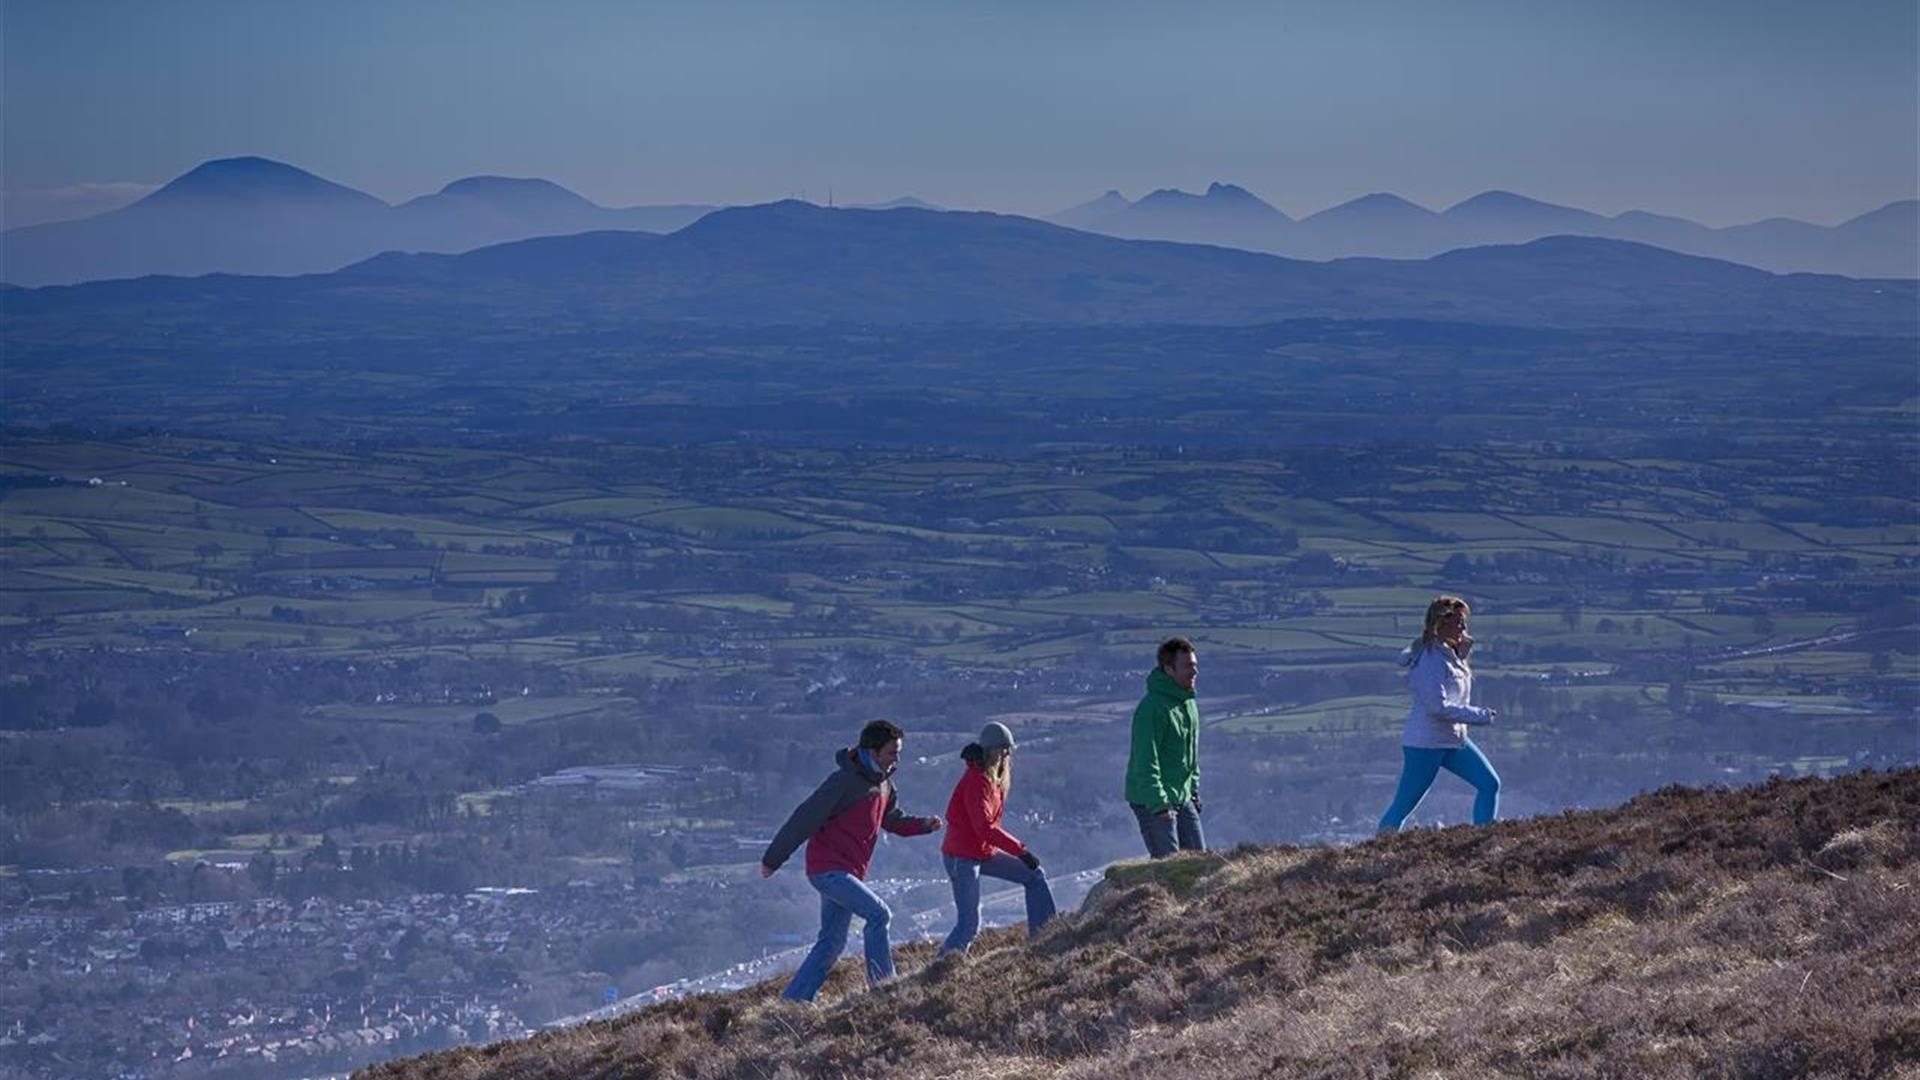 Divis and the Black Mountain